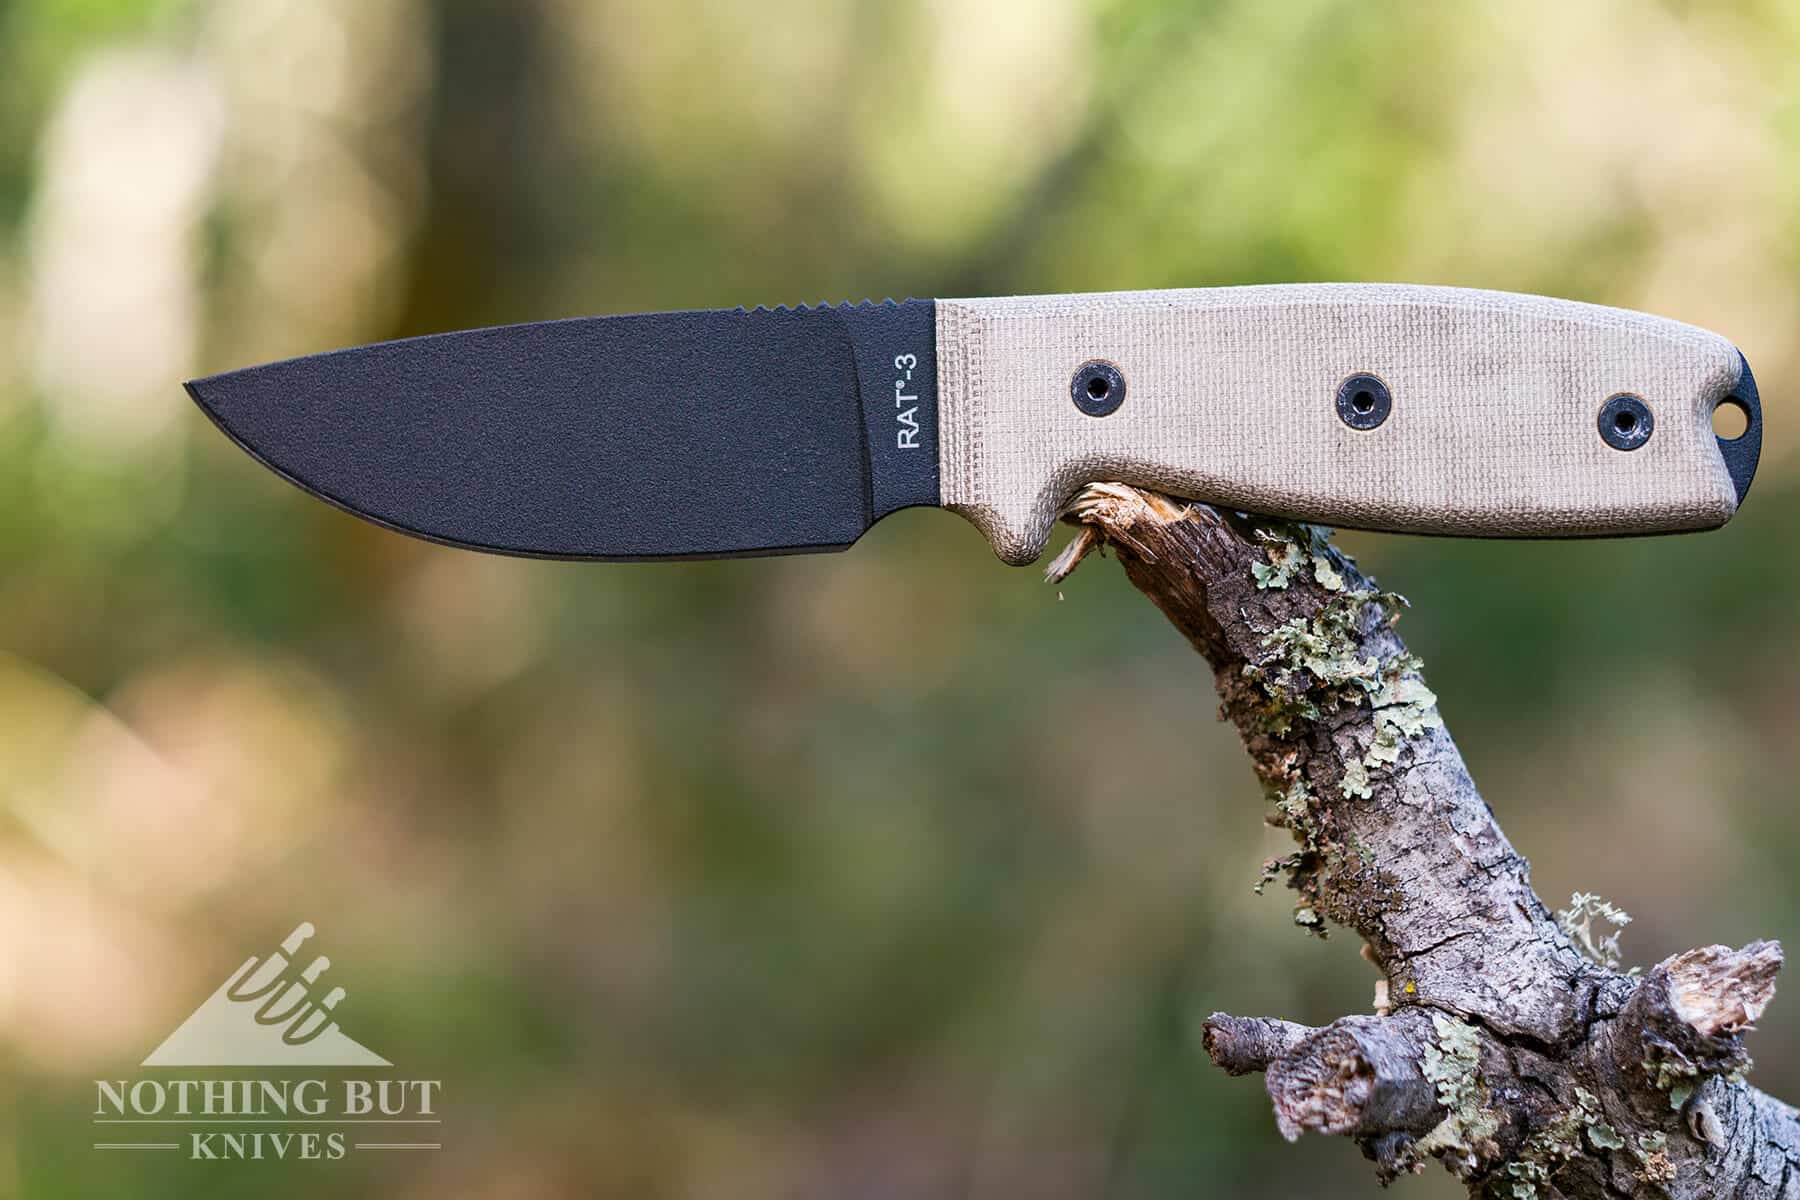 The Rat 3 is a good budget alternative to more expensive bushcraft and camping knife models.